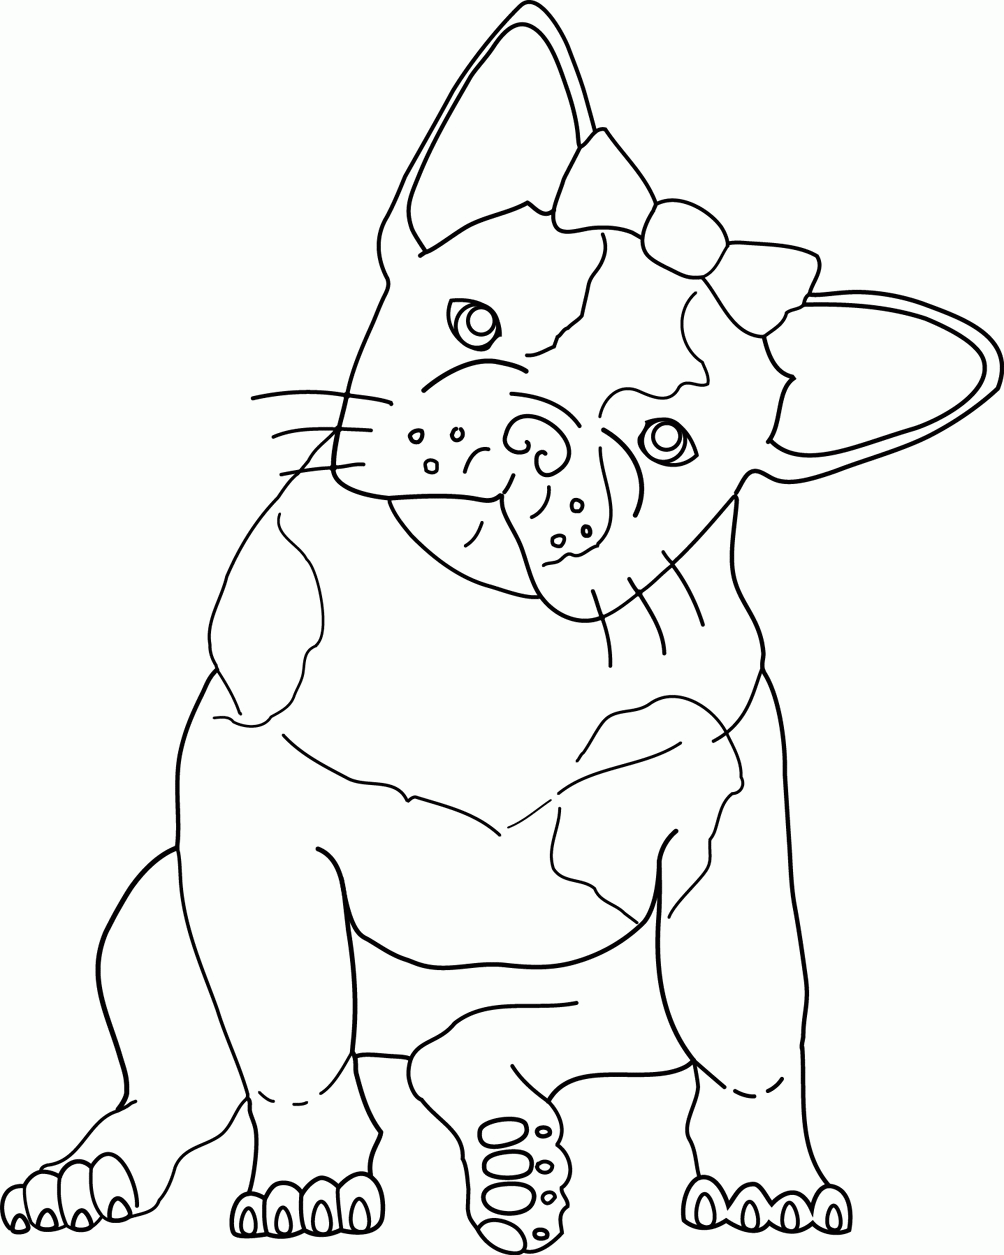 Bulldog Coloring Pages - Widetheme